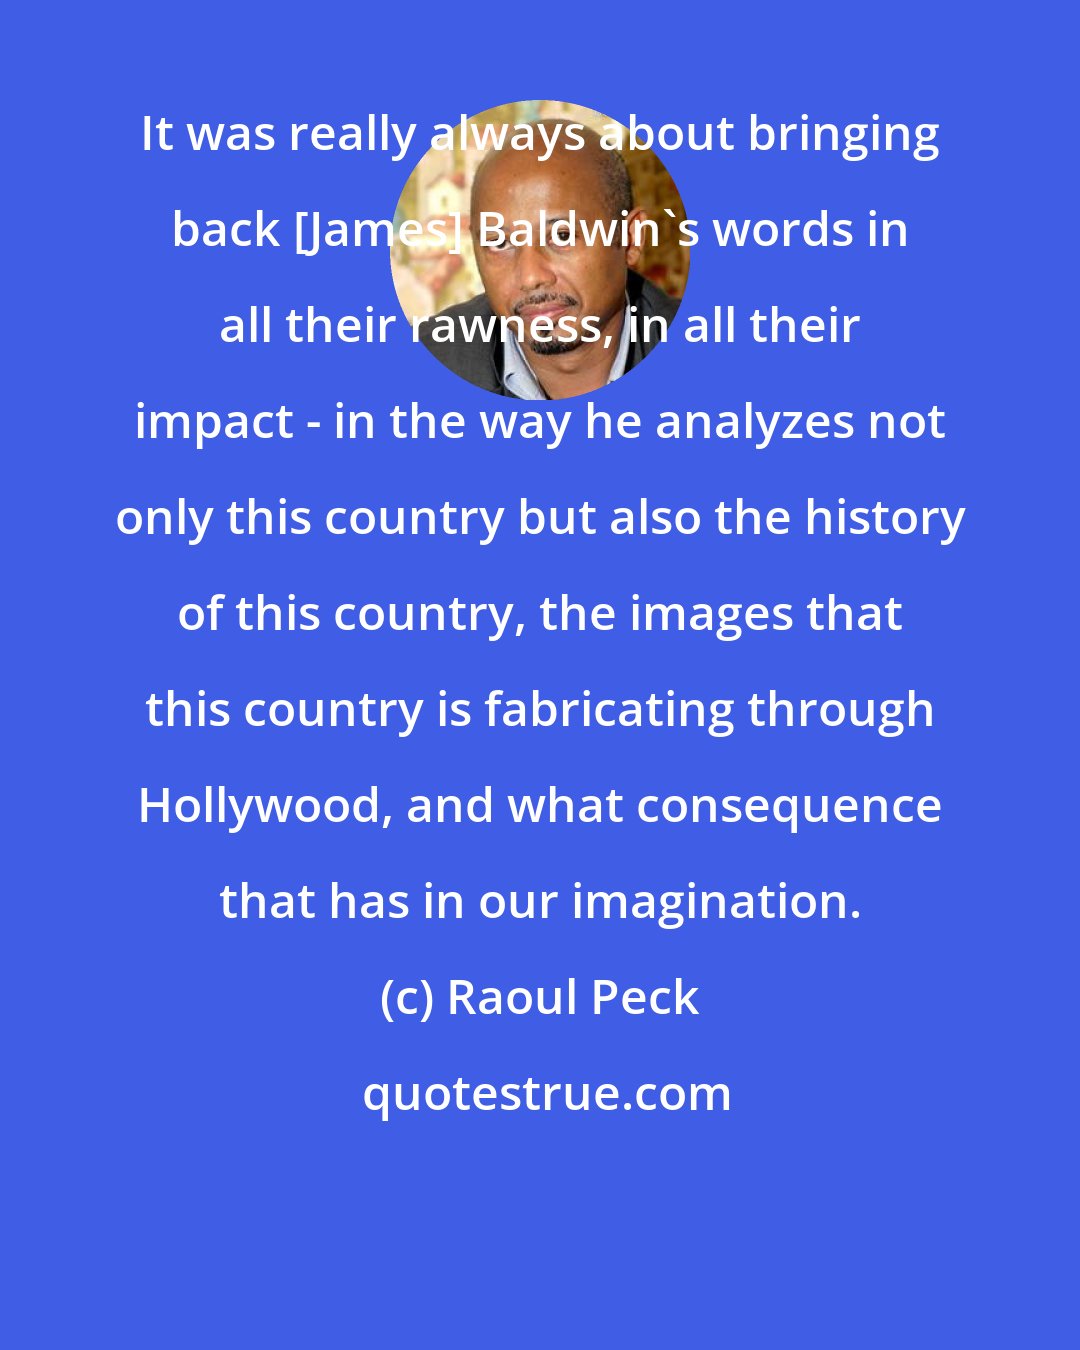 Raoul Peck: It was really always about bringing back [James] Baldwin's words in all their rawness, in all their impact - in the way he analyzes not only this country but also the history of this country, the images that this country is fabricating through Hollywood, and what consequence that has in our imagination.